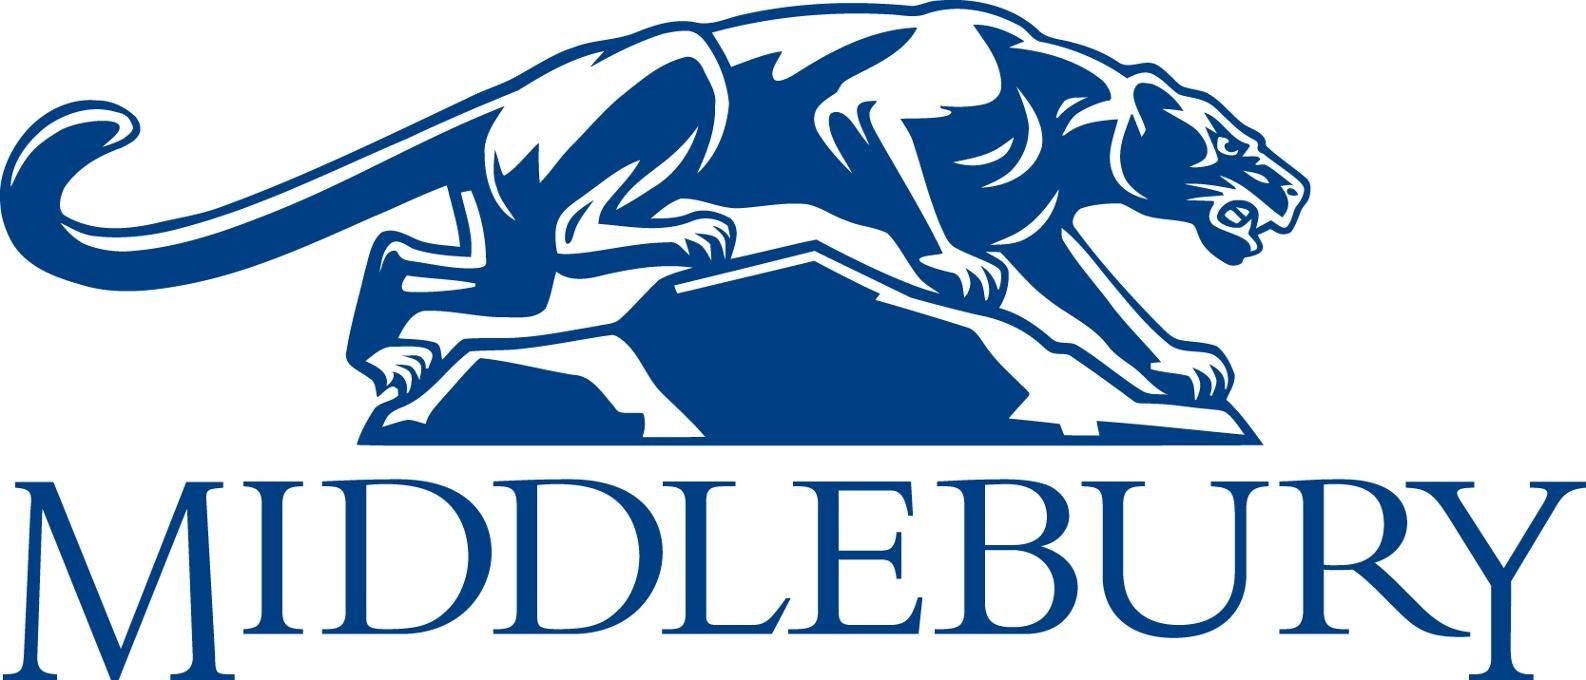 Middlebury College Logo - Men's Hockey Drops 4-1 Contest To Hobart - Middlebury College Athletics